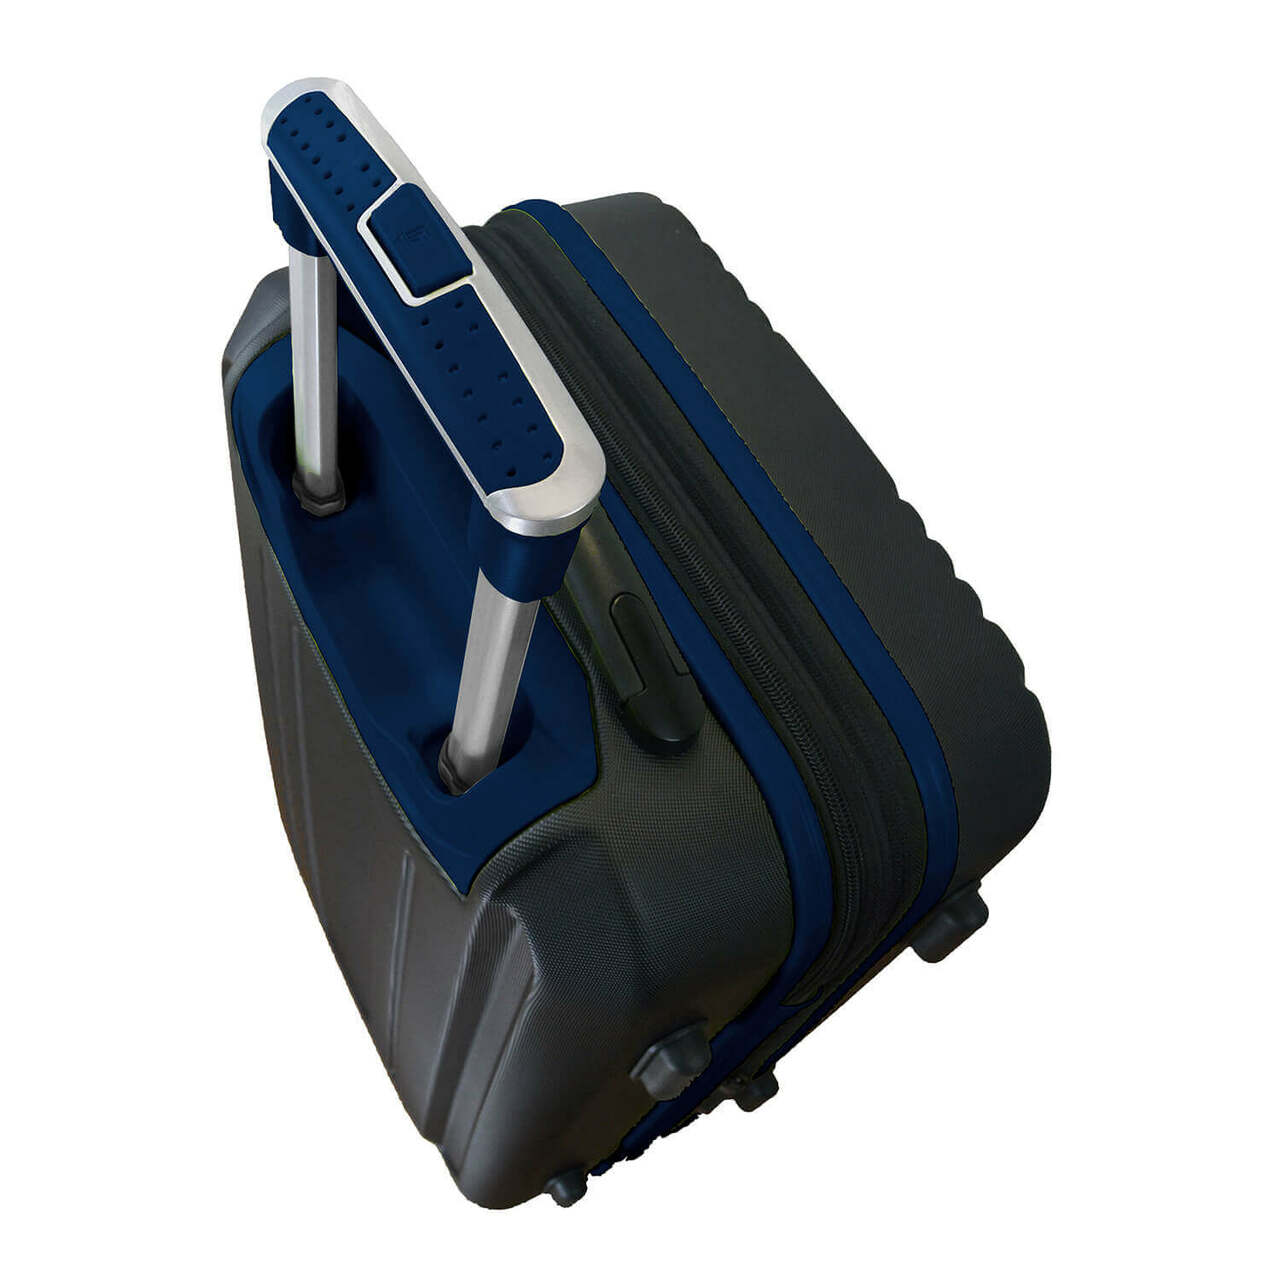 Chargers Carry On Spinner Luggage | Los Angeles Chargers Hardcase Two-Tone Luggage Carry-on Spinner in Navy